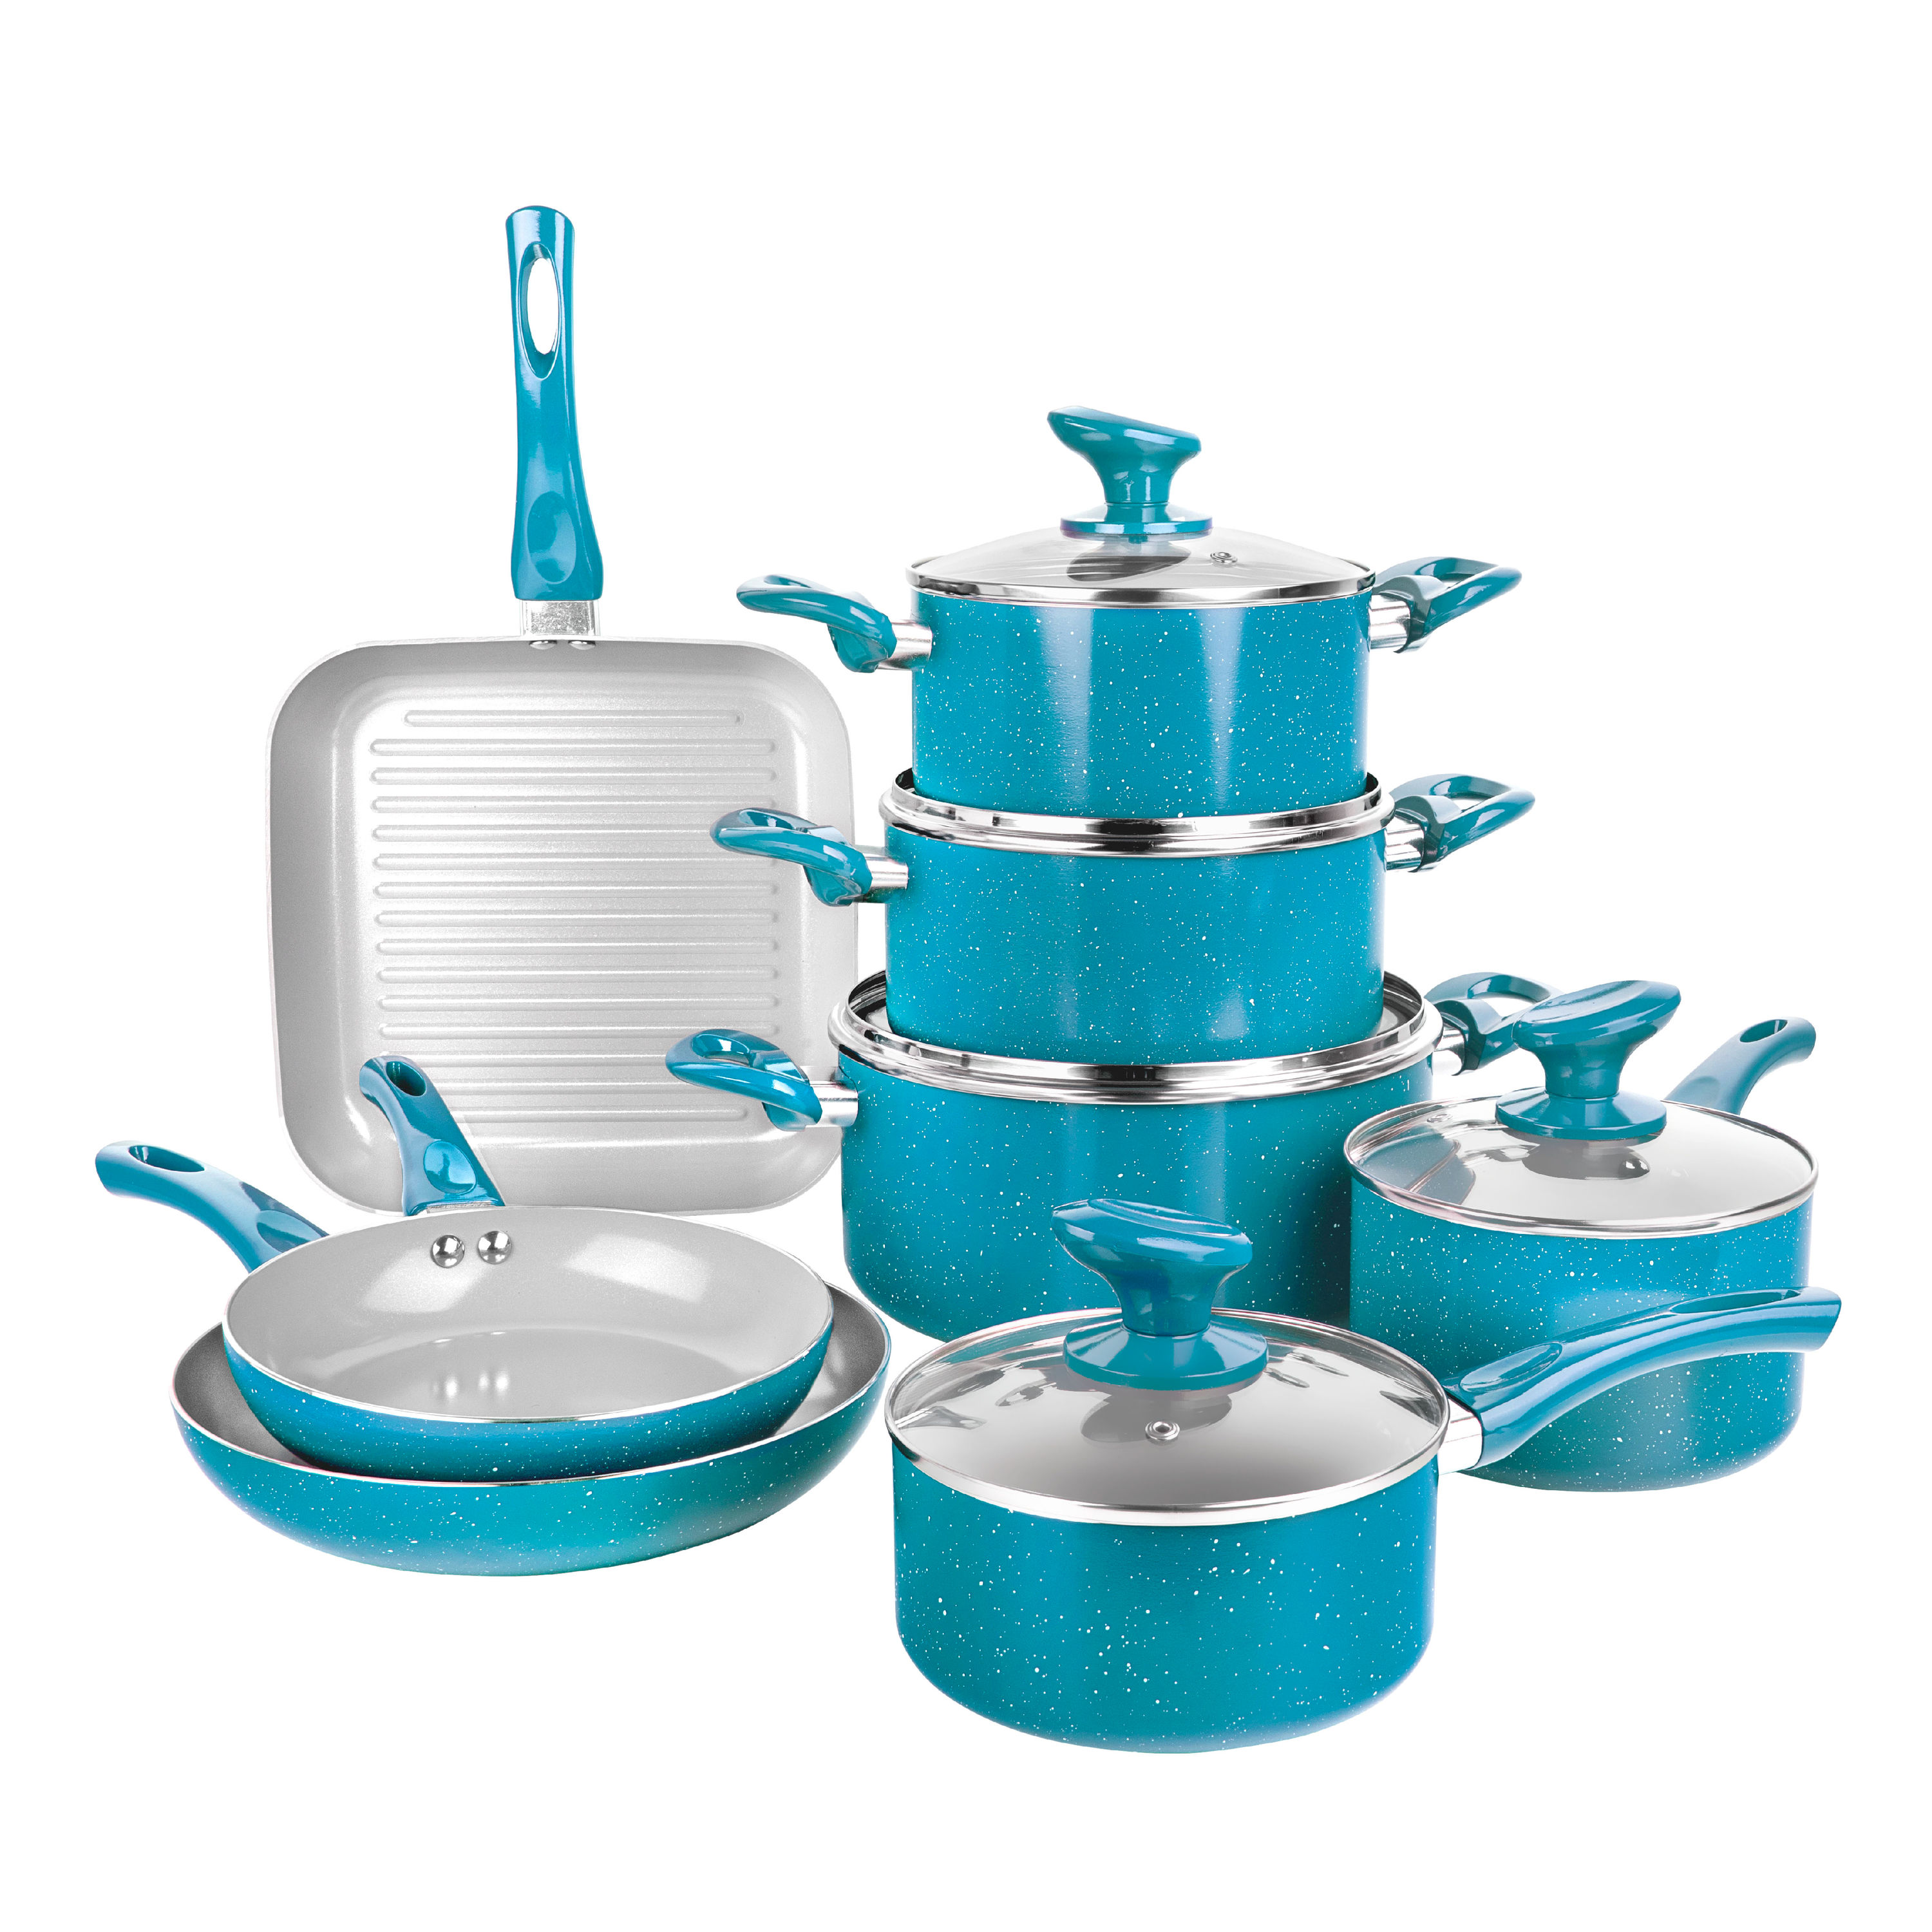 GREENLIFE Healthy Ceramic Nonstick Cookware Pots and Pans 13 Piece Set  Turquoise